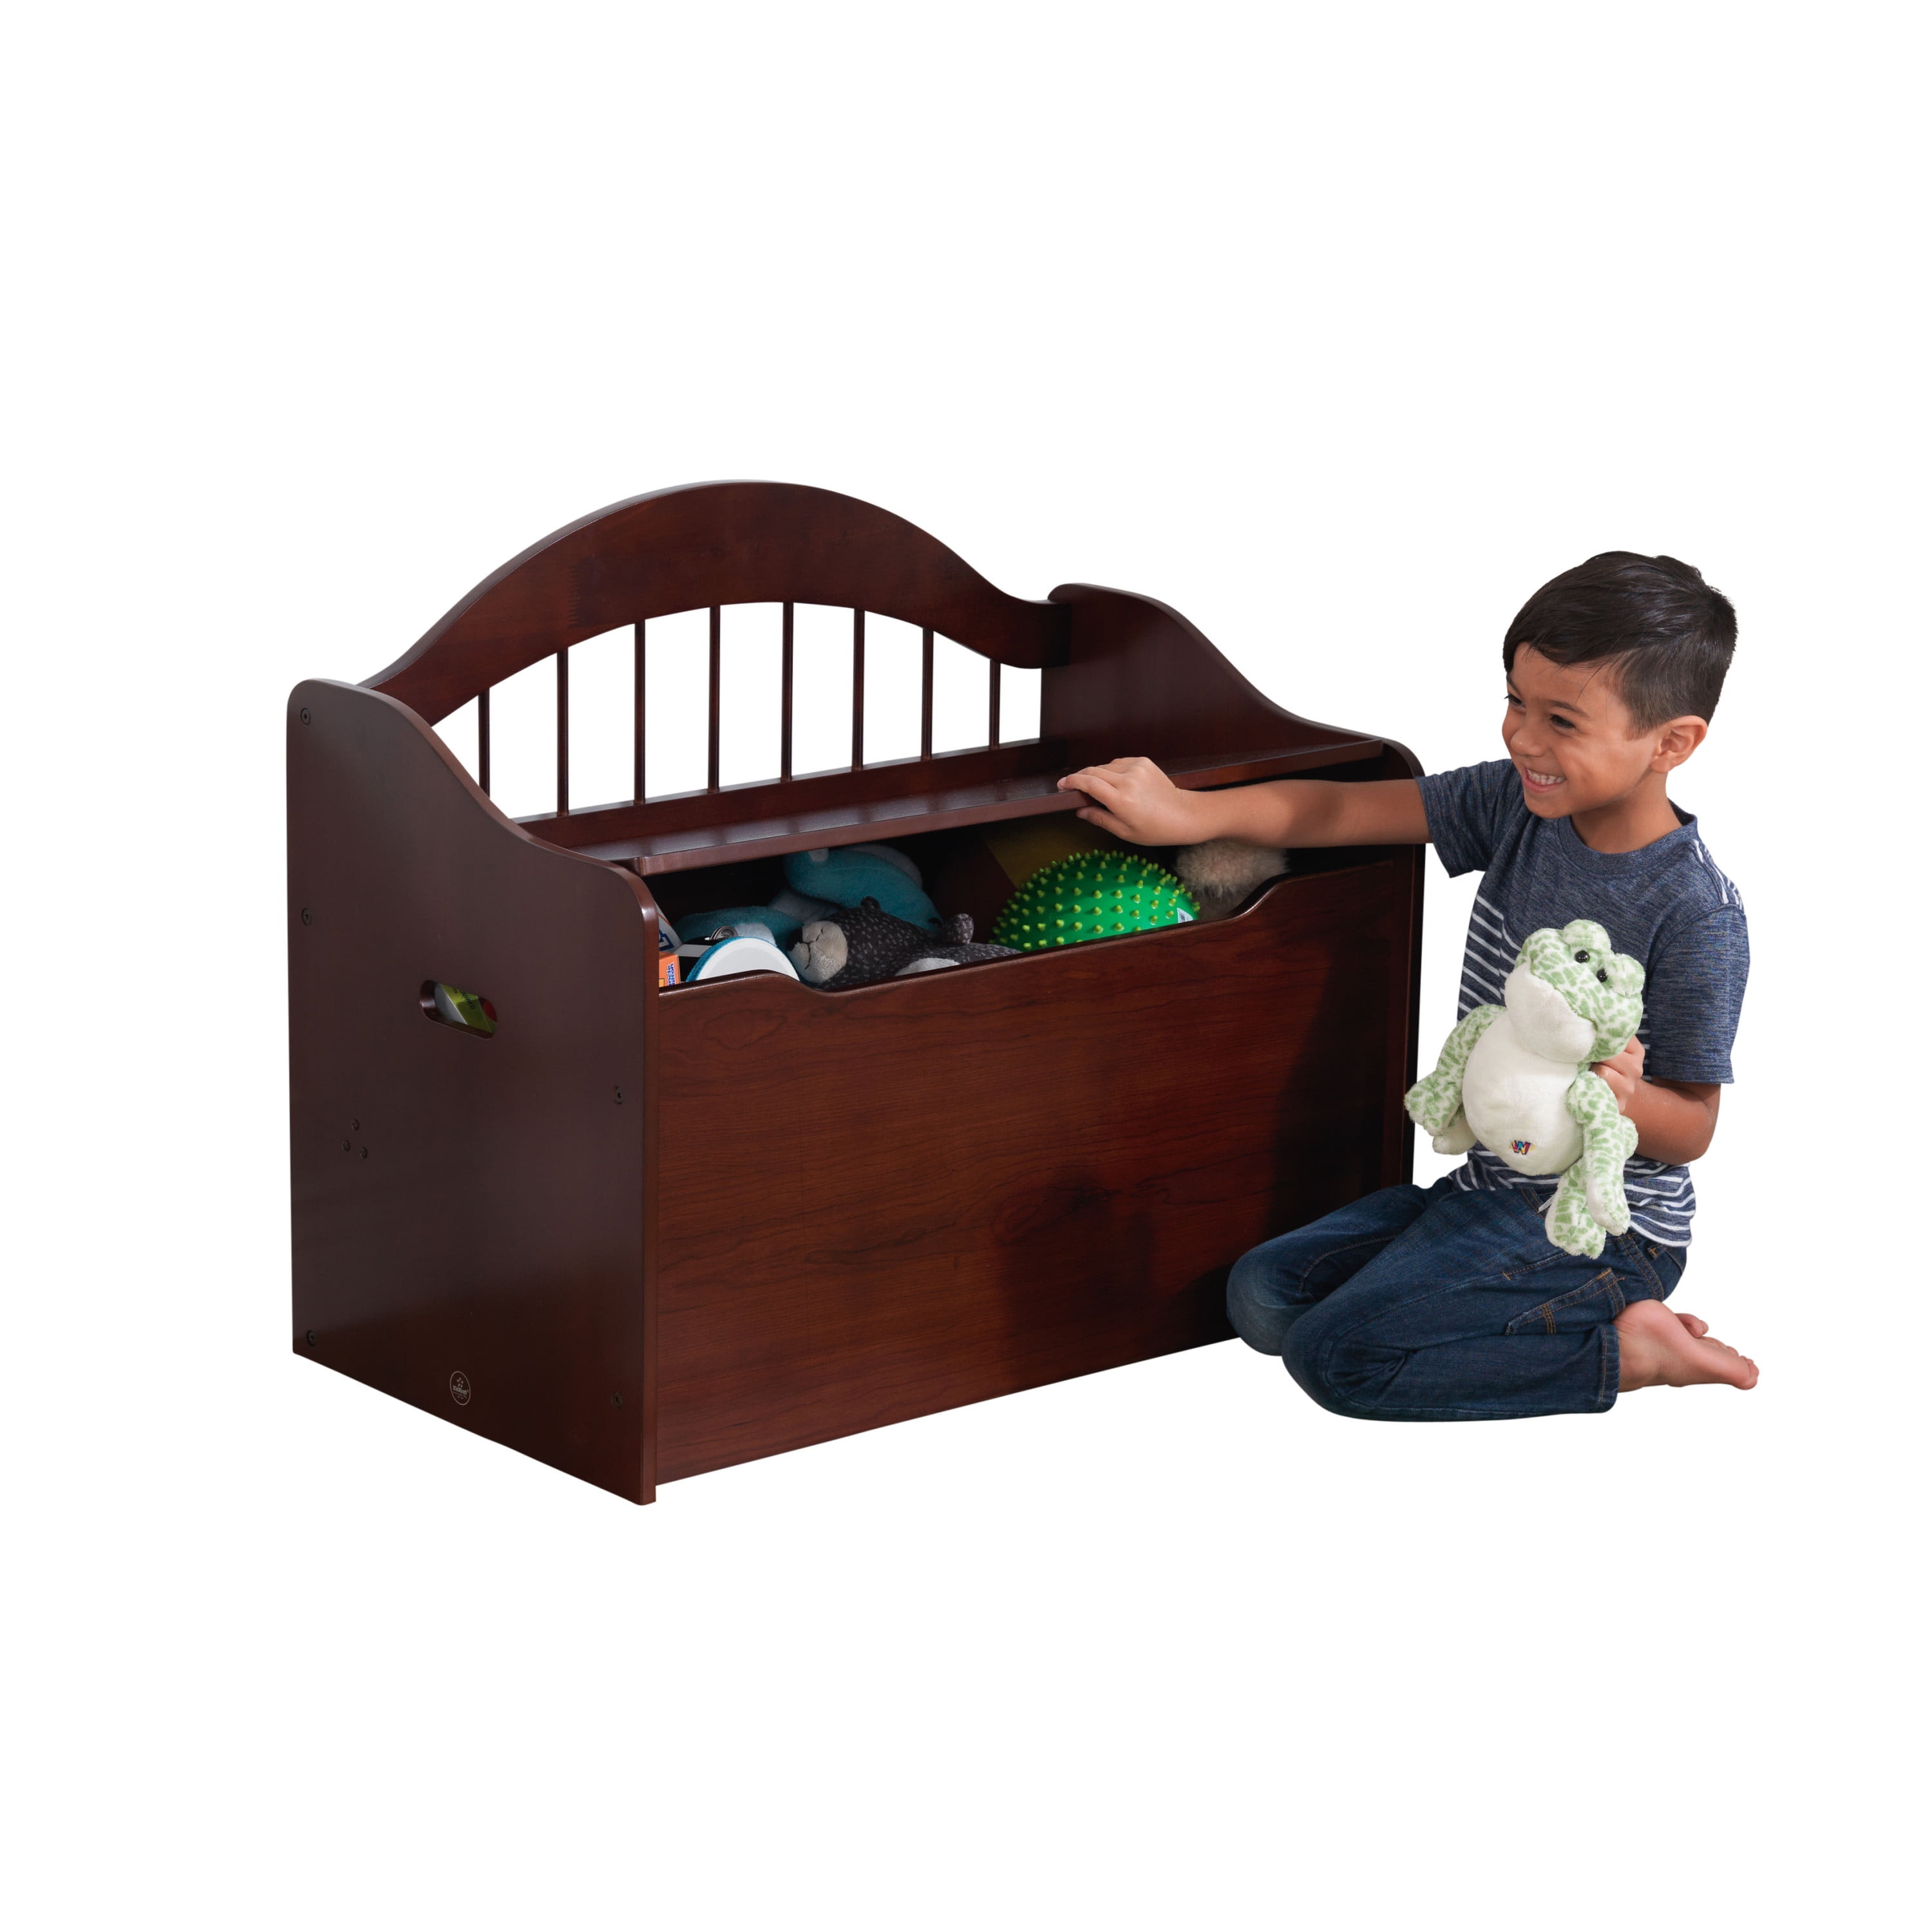 KidKraft Limited Edition Wooden Toy Box and Bench with Handles and